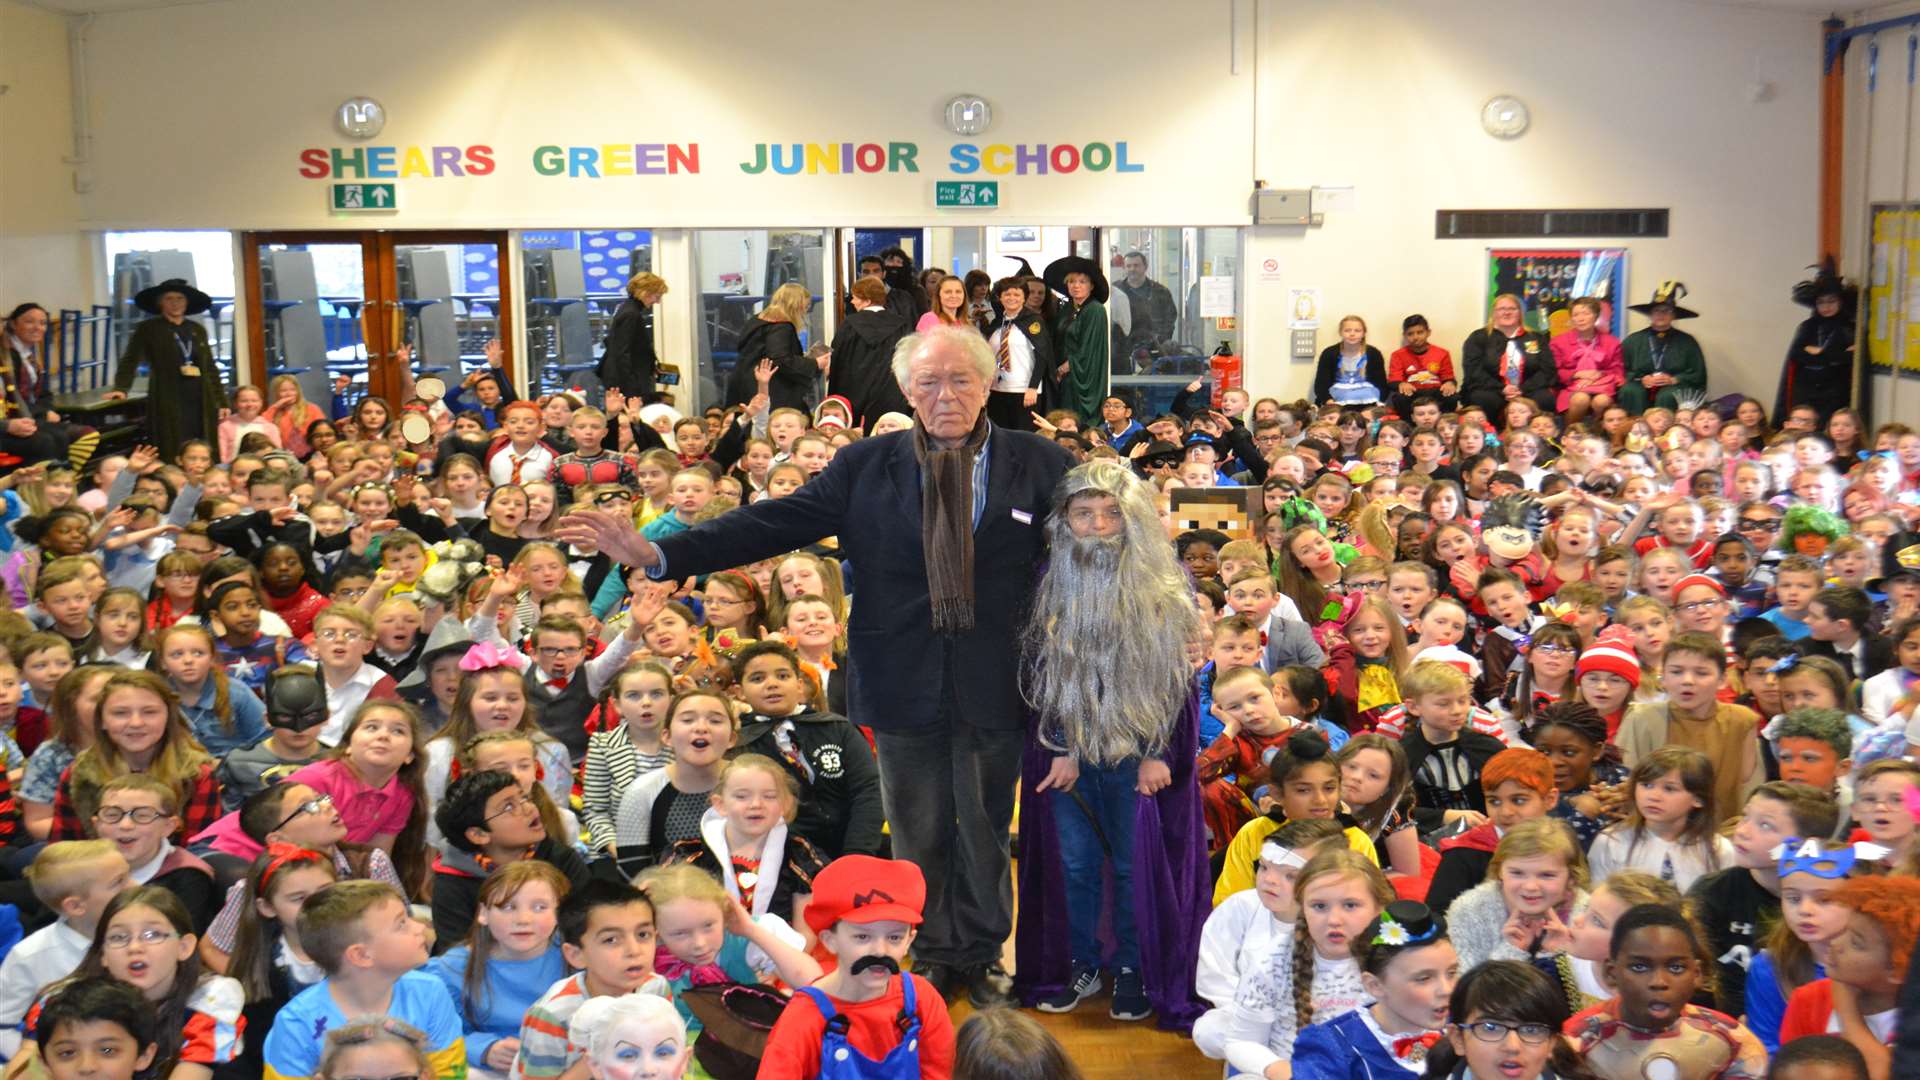 Michael Gambon spoke to the whole school during assembly on World Book Day. Picture: Shears Green Junior School